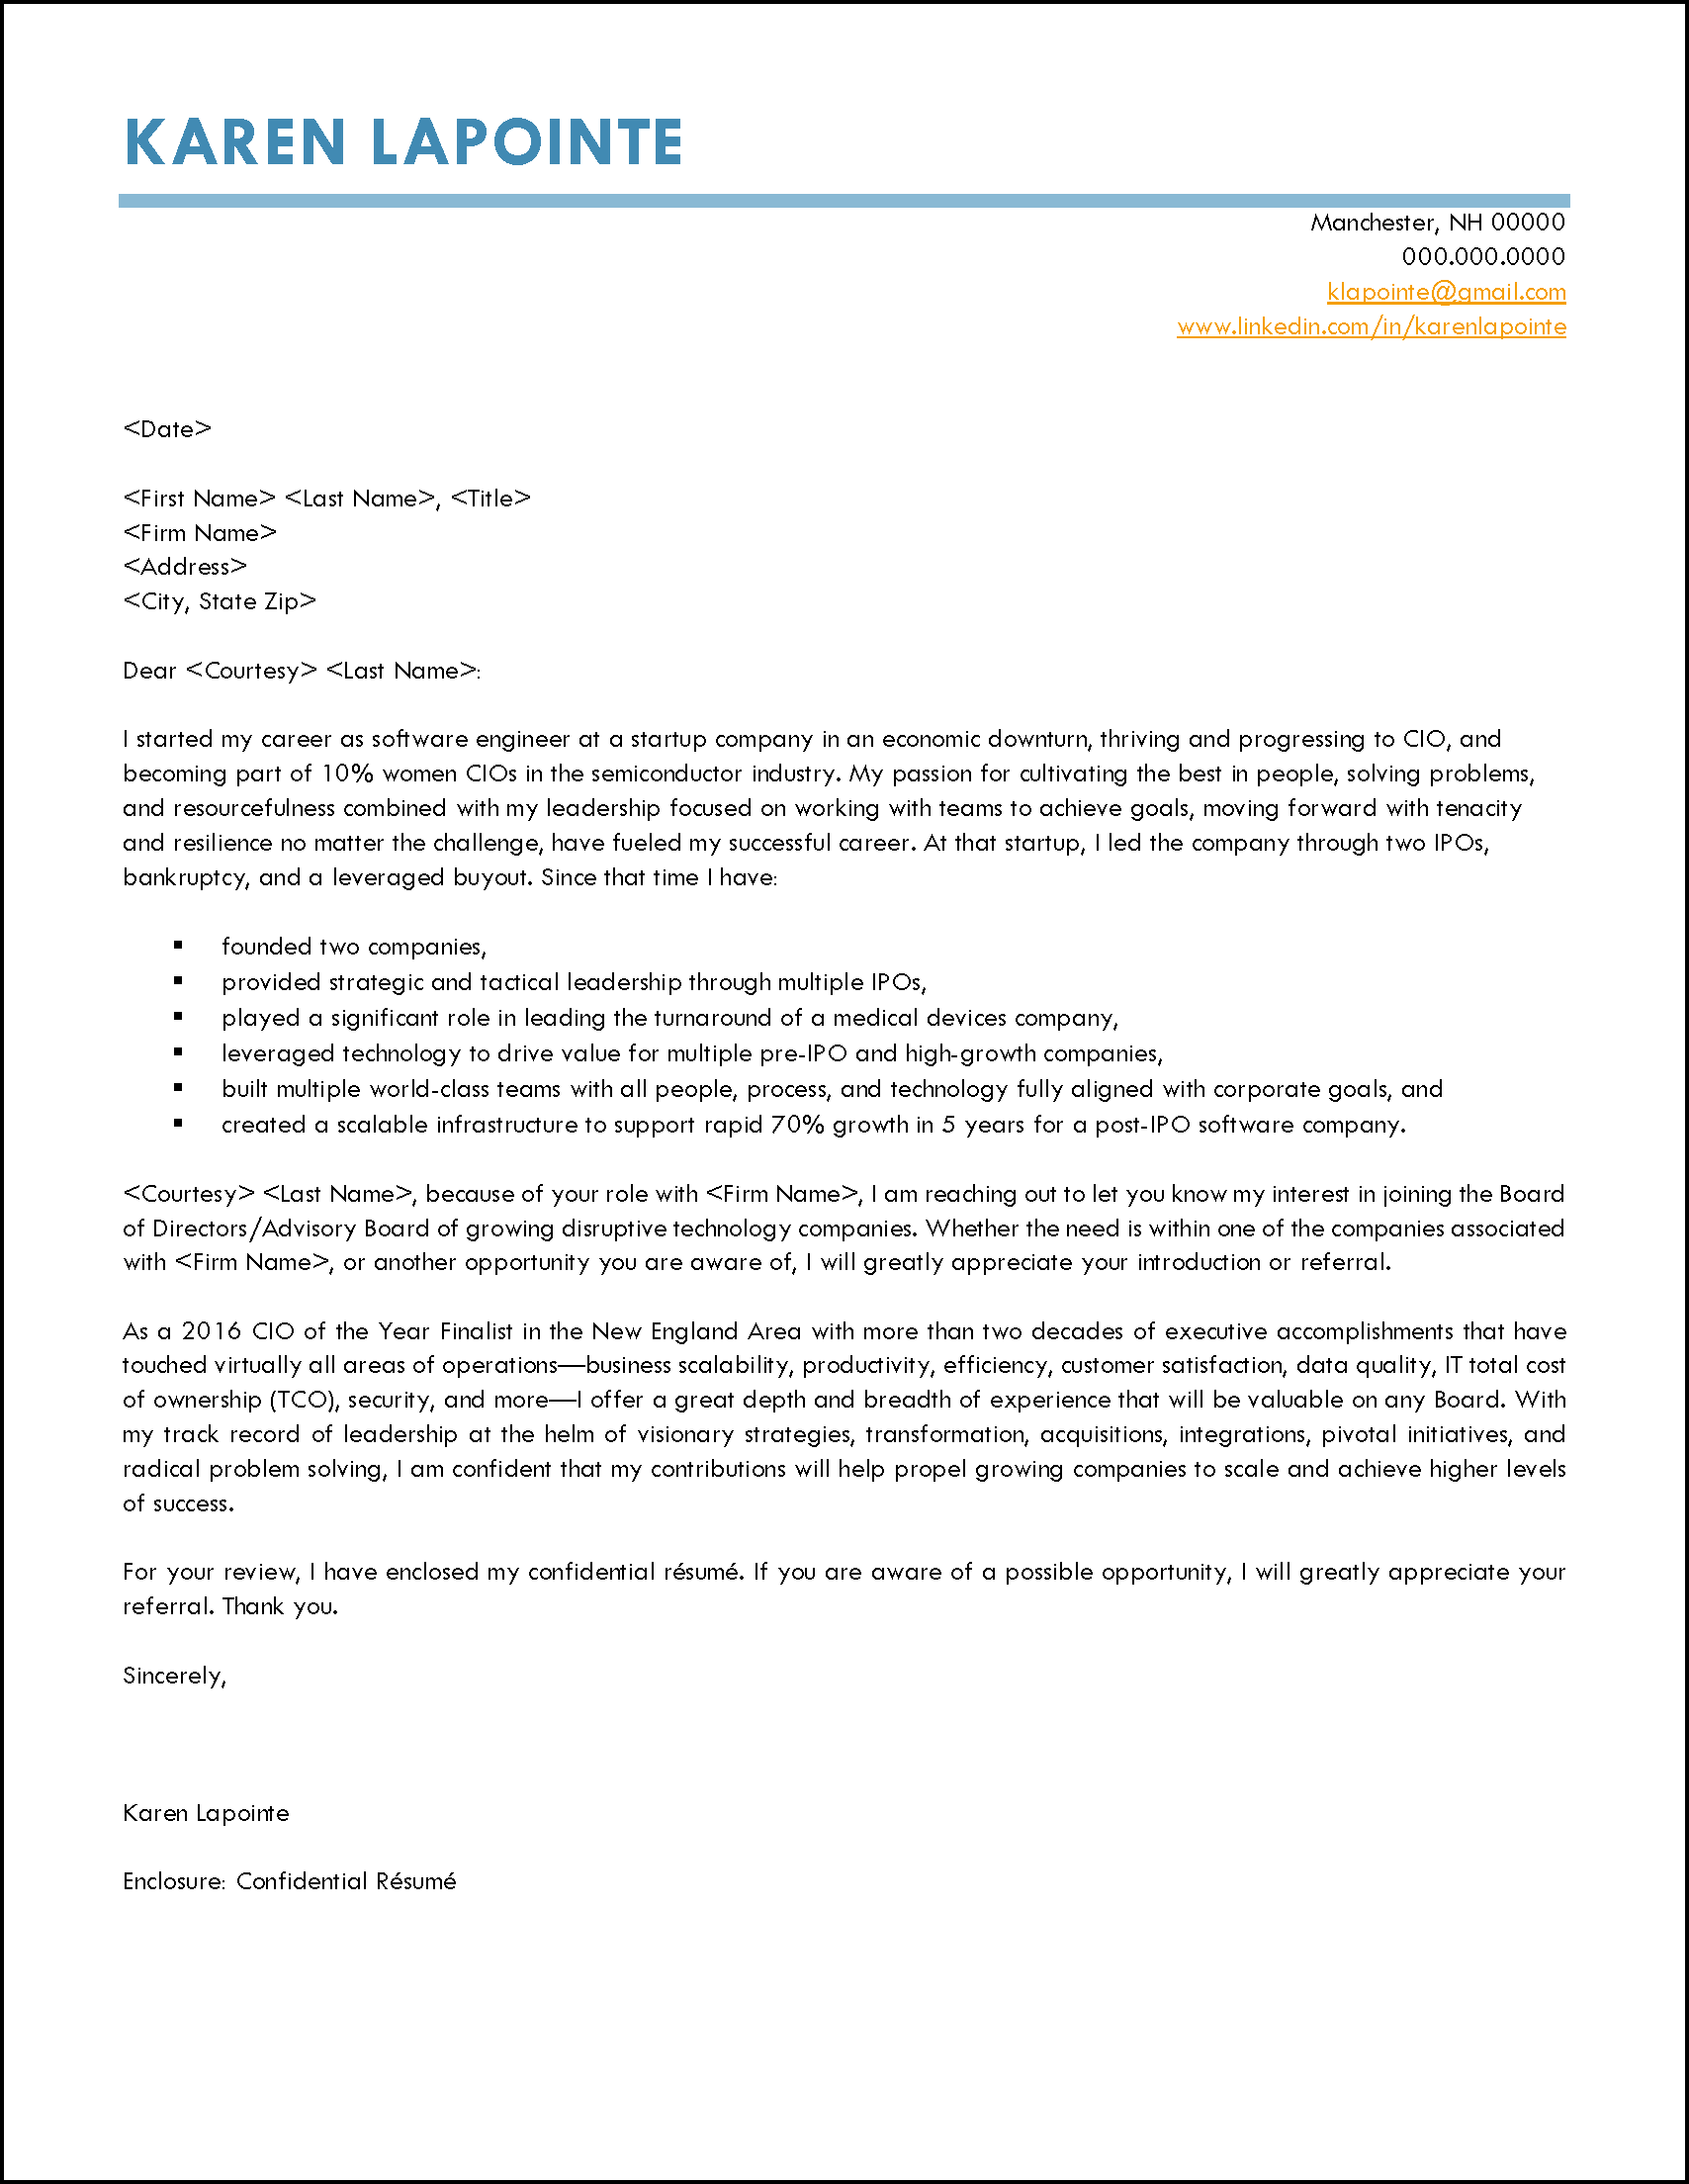 Venture Capital/Private Equity Cover Letter To Target Board of Director Positions